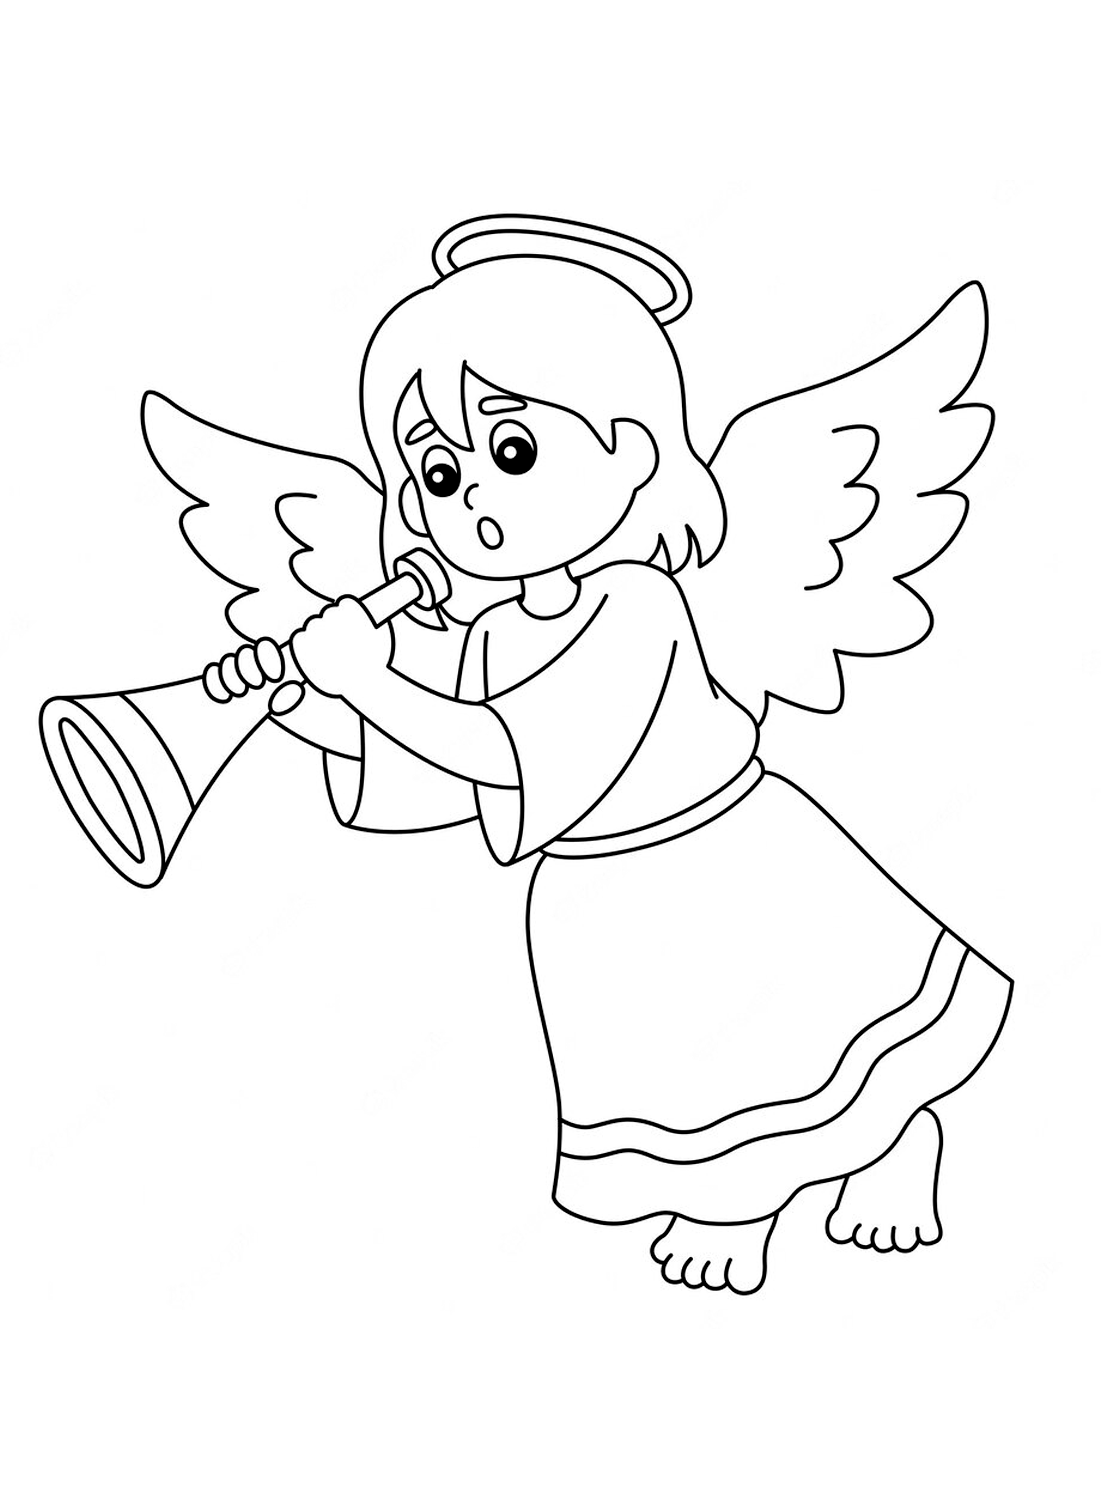 Angel pictures to color